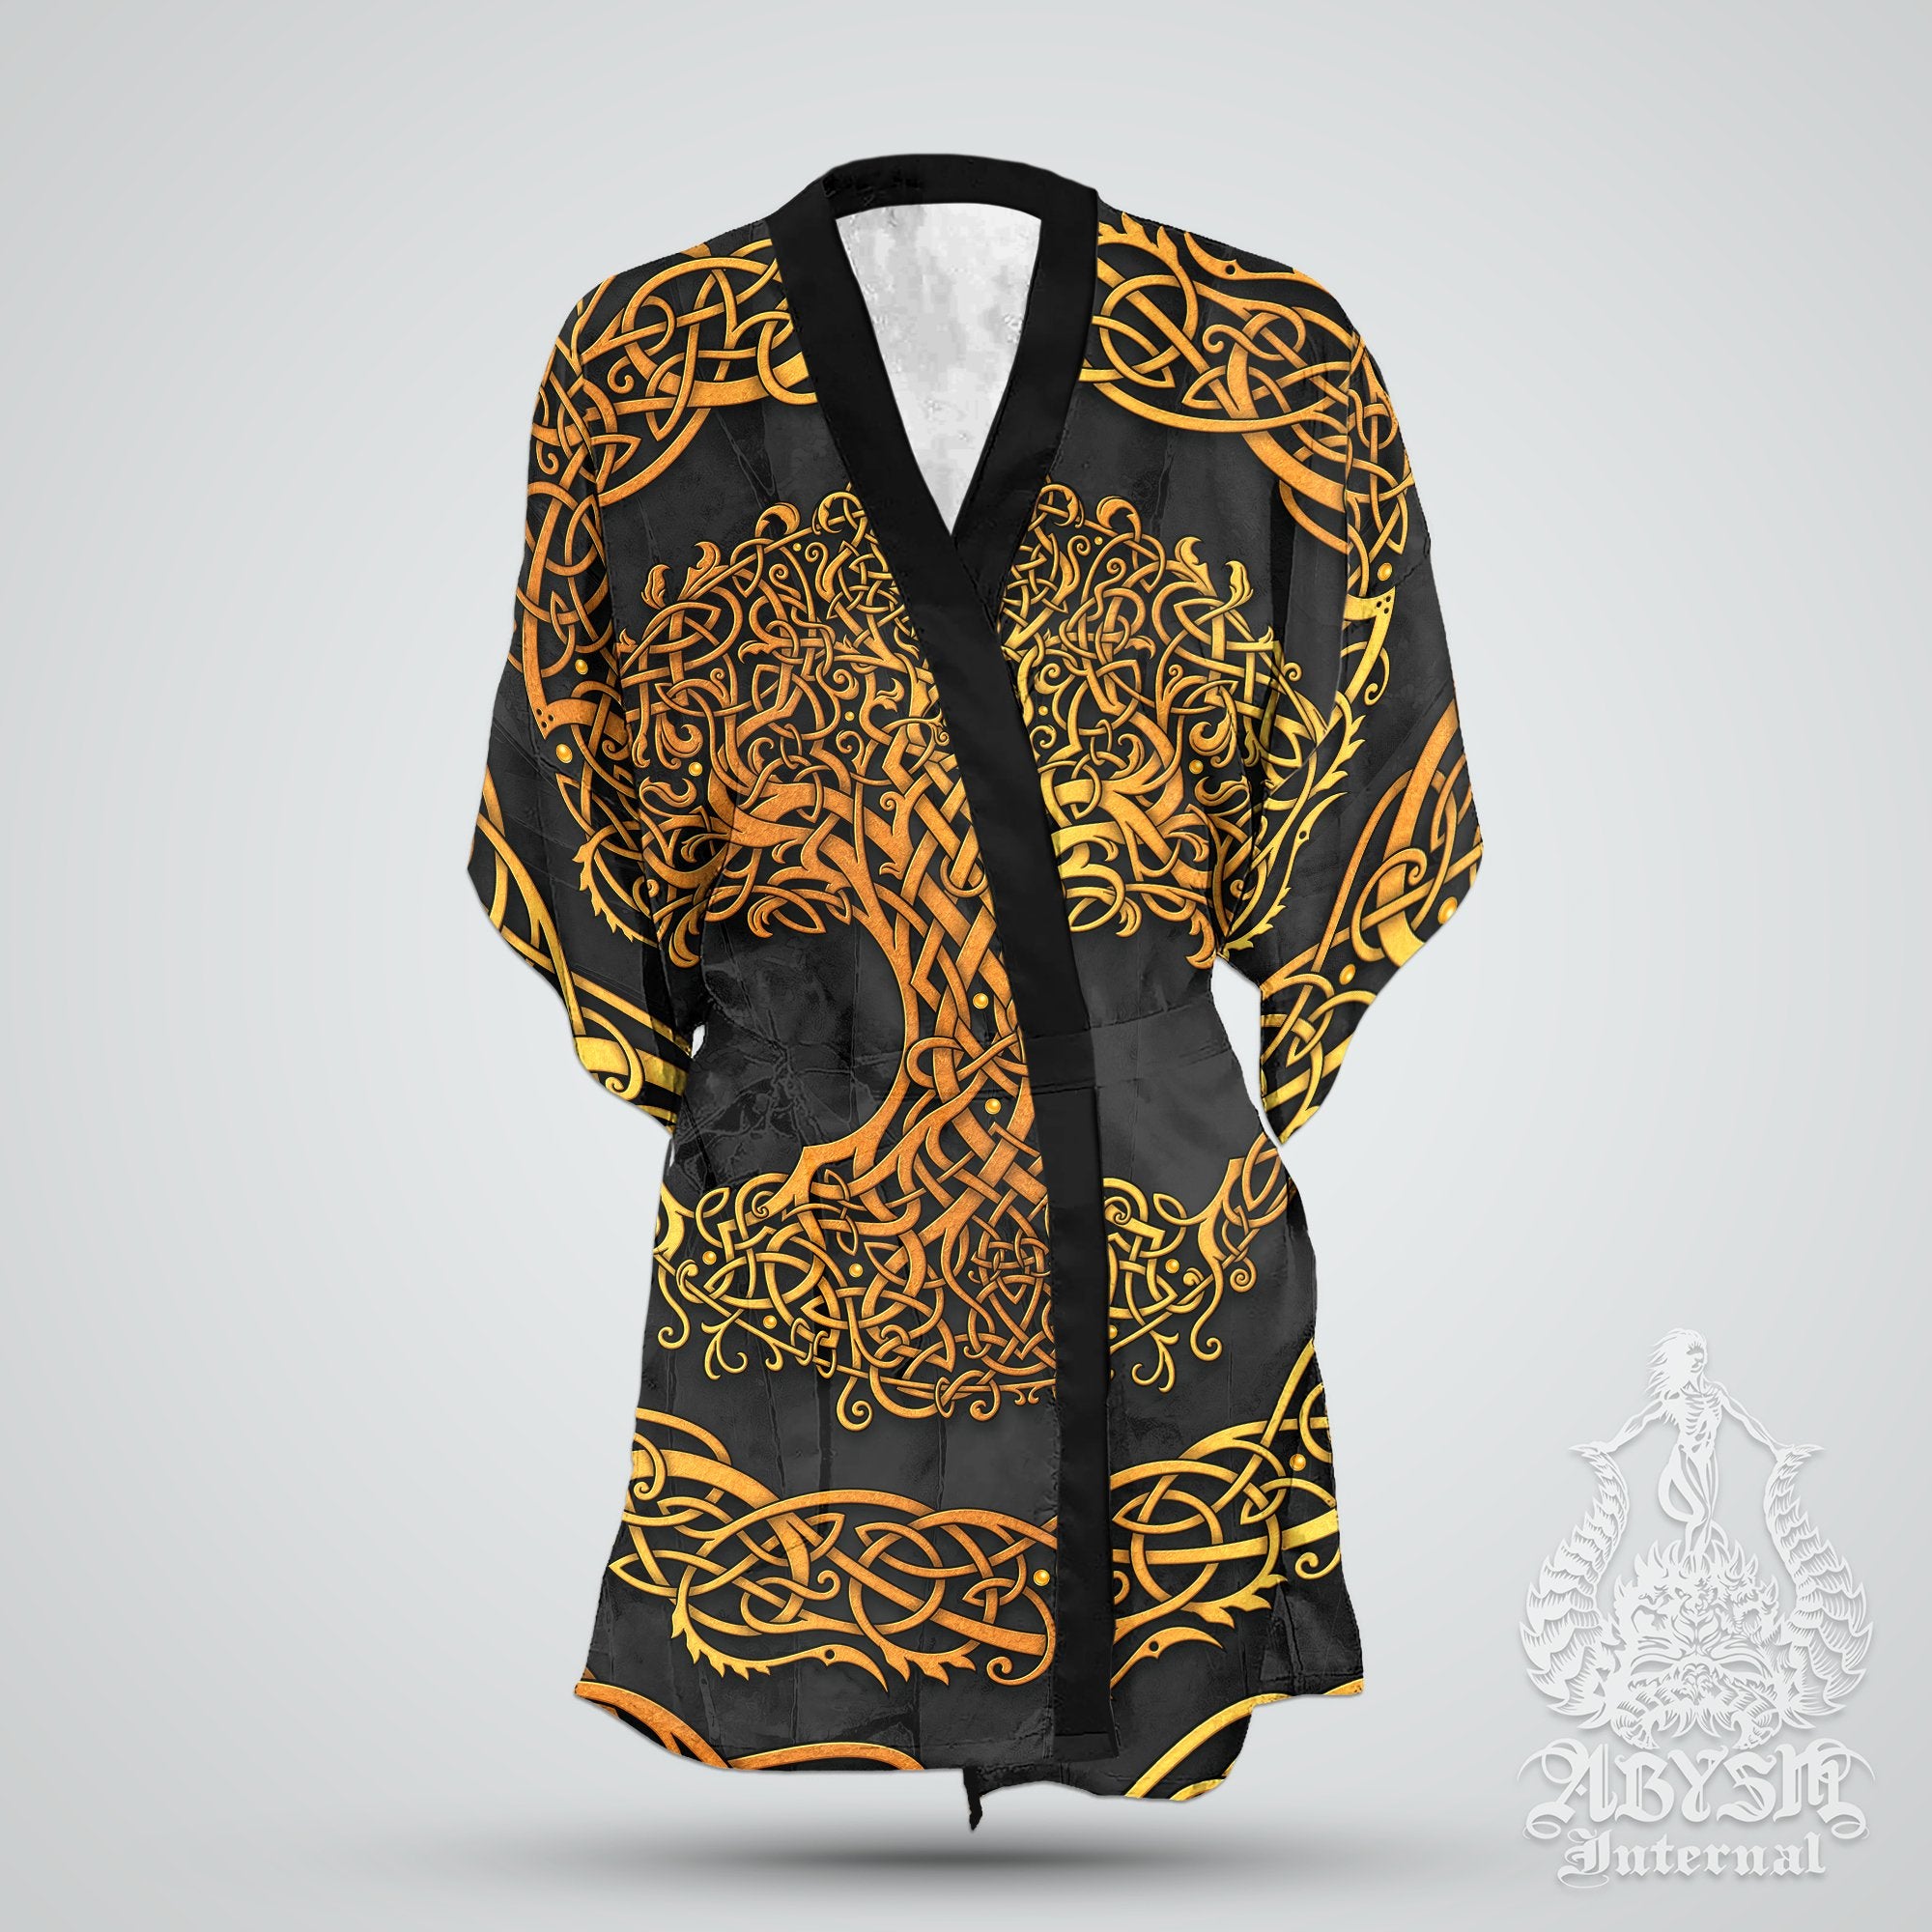 Hippie Short Kimono Robe, Beach Party Outfit, Celtic Tree of Life Coverup, Wicca Summer Festival, Witchy Indie Clothing, Unisex - Gold and Colors: Green, Purple, Black - Abysm Internal